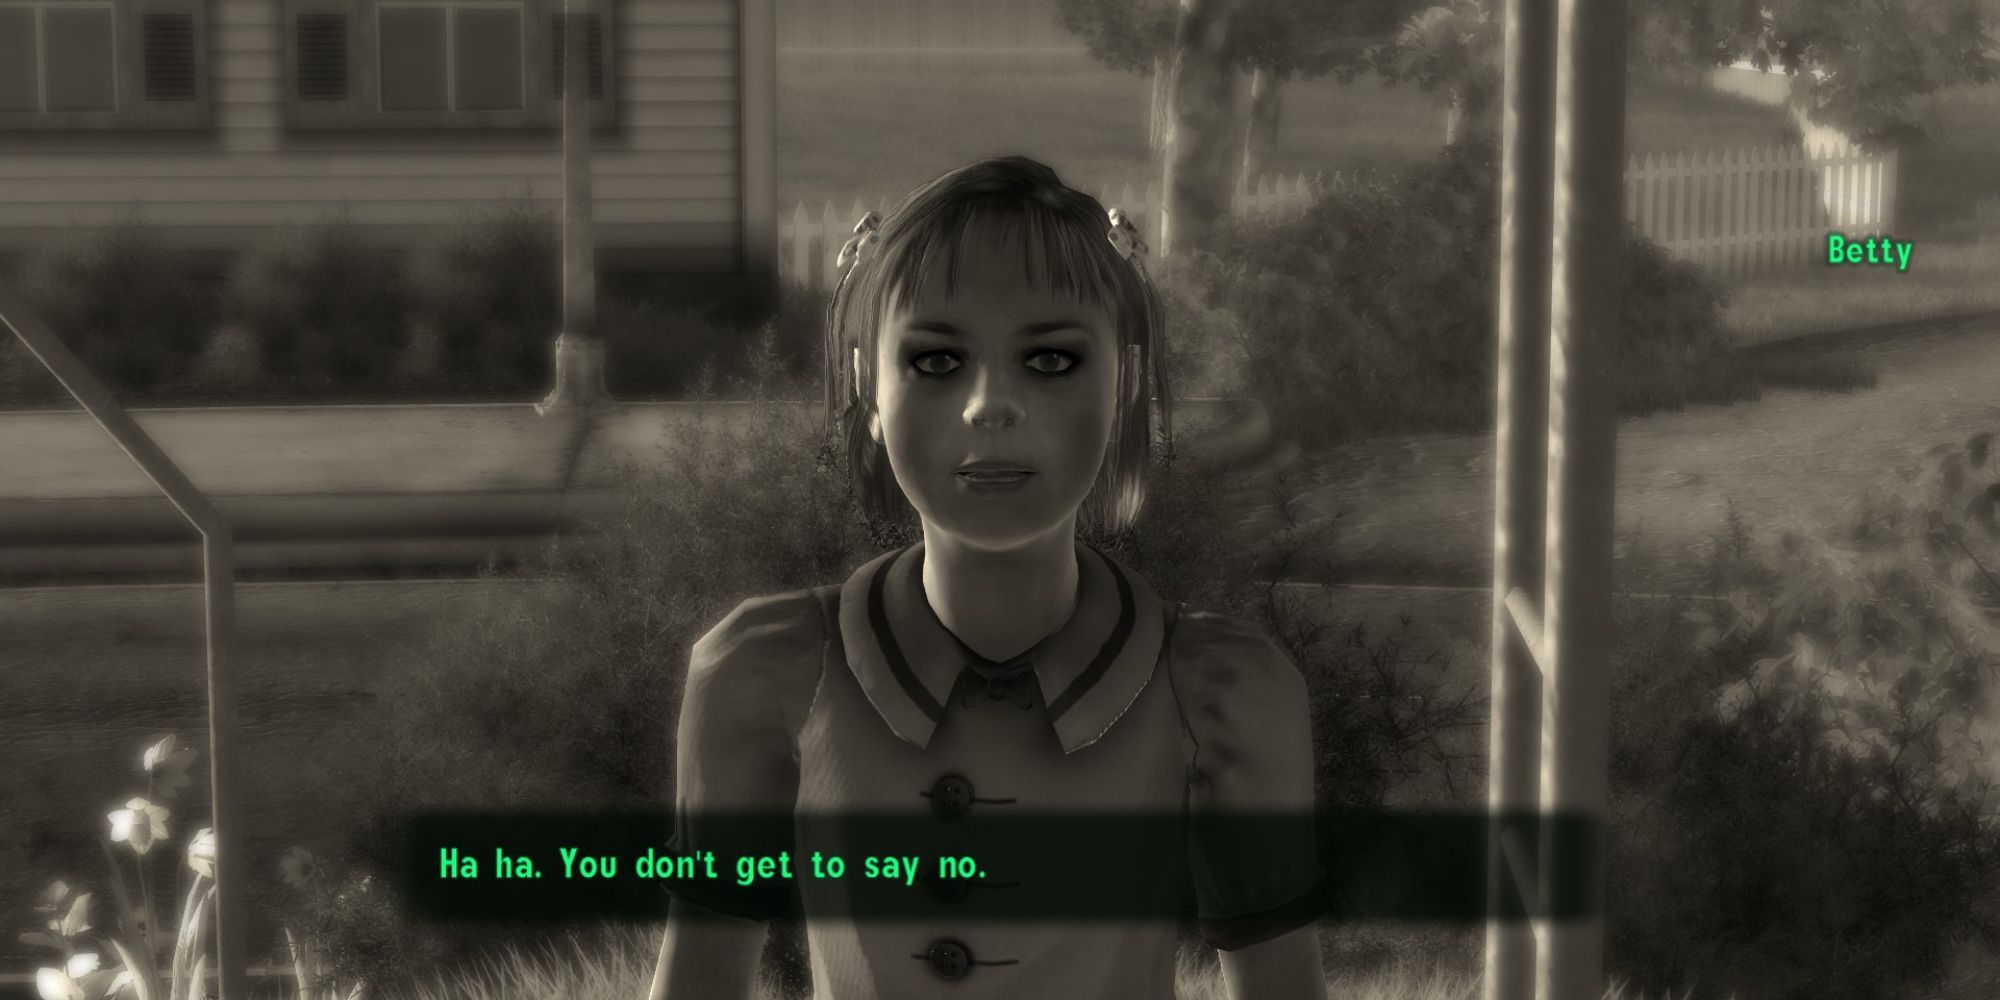 Betty tells the player that she cannot refuse her game in Tranquility Lane.